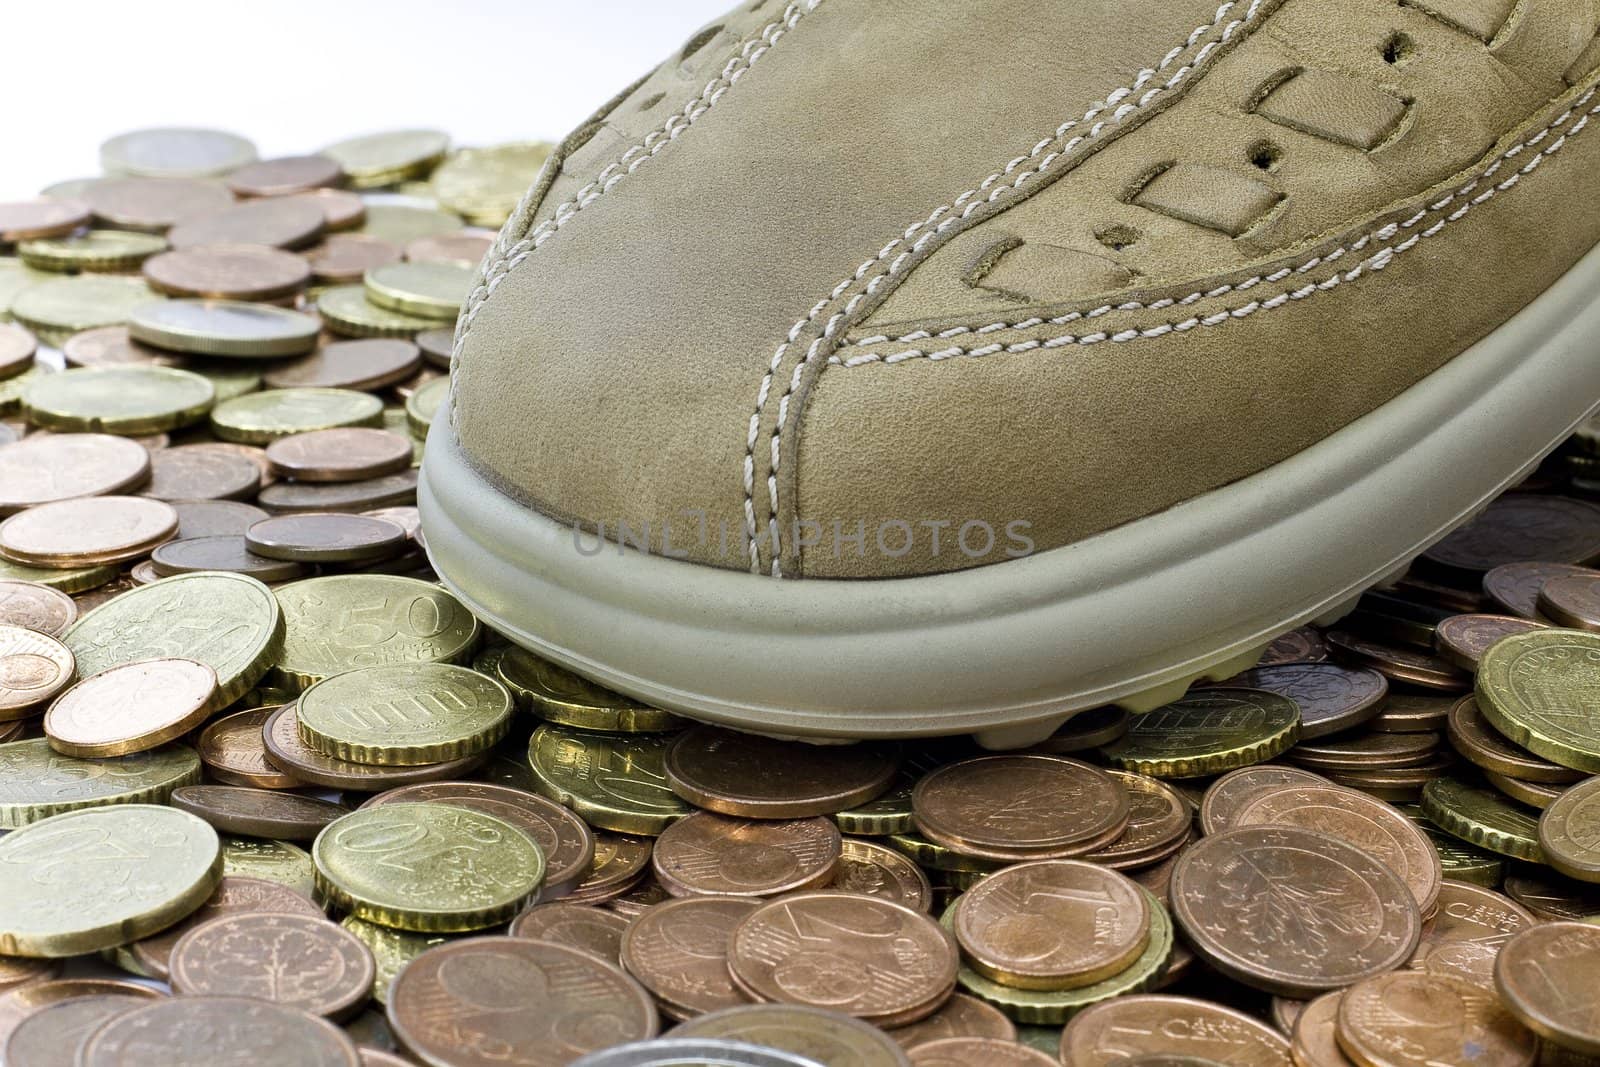 light brown leather shoe walking on euro coins